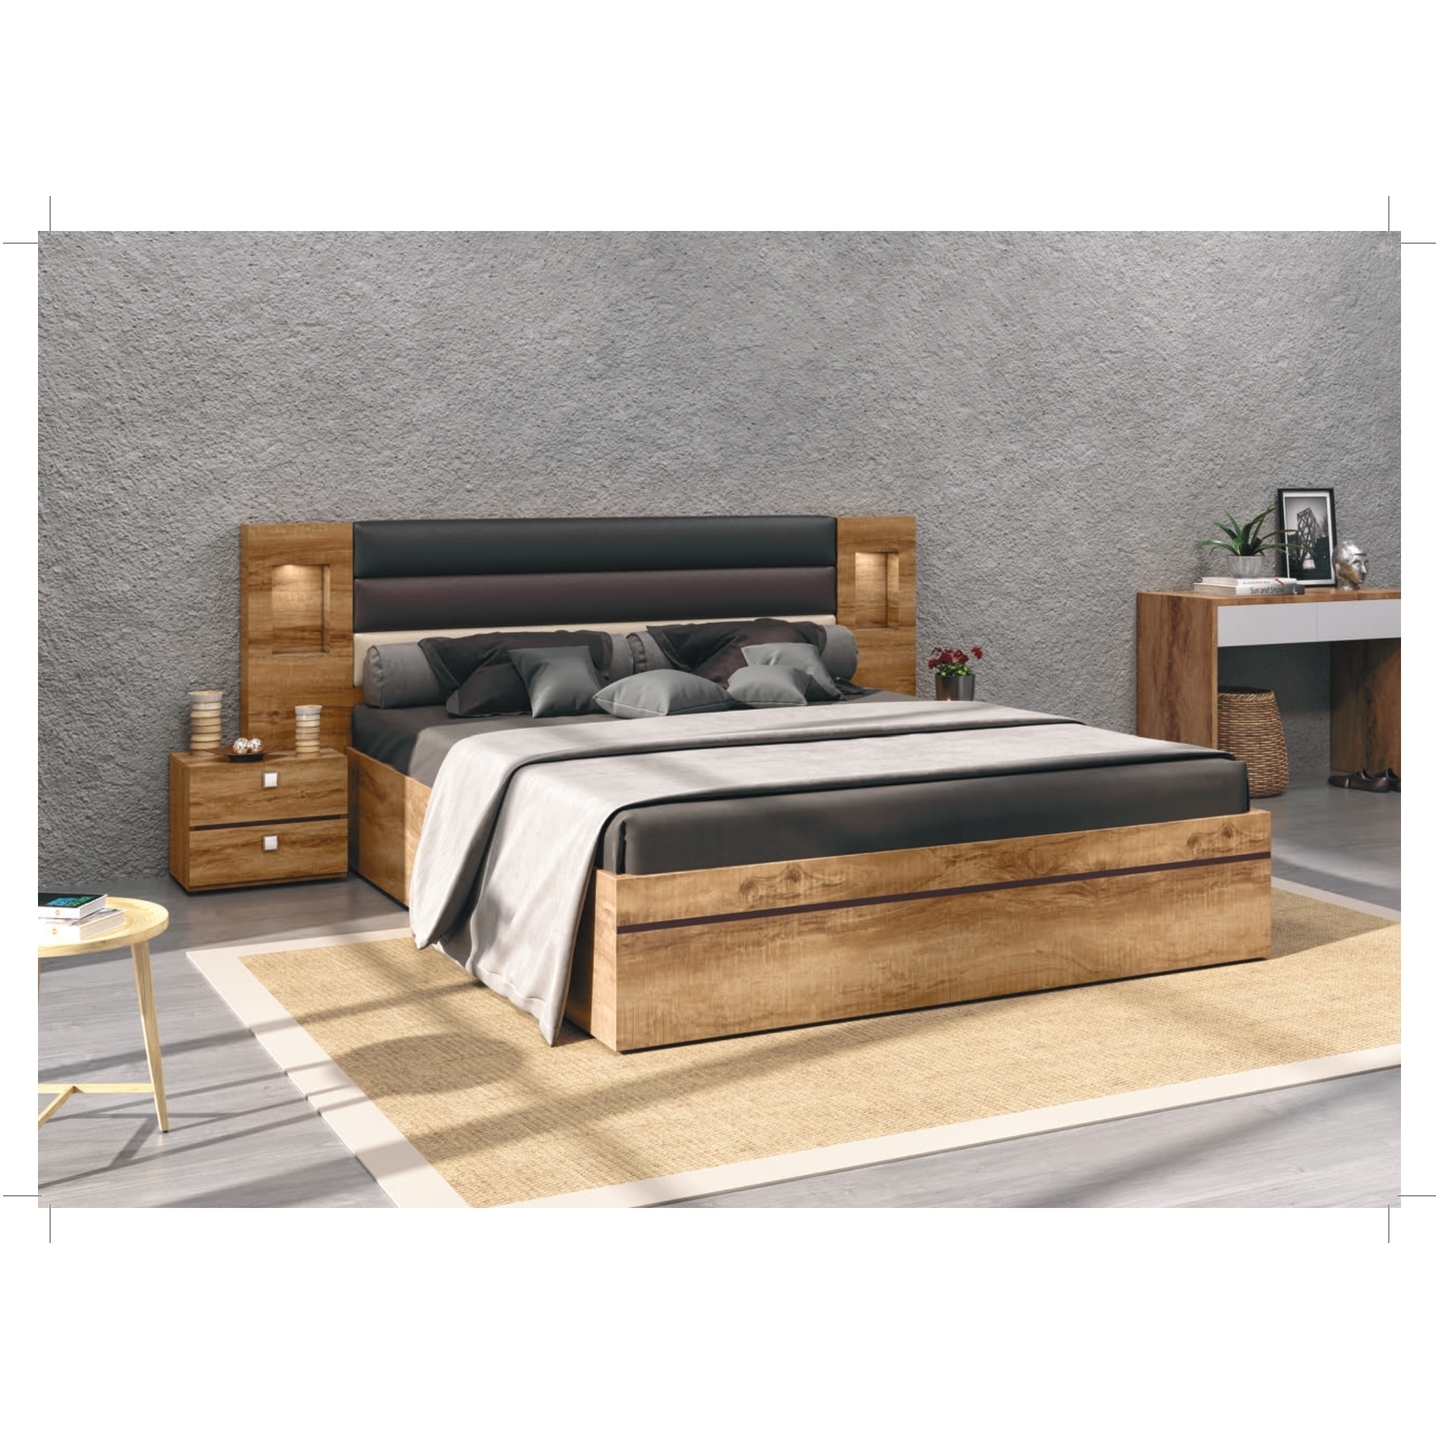 RLF Queen Size Bed 78x60 Venus Bed With Side Box In Brown Colour